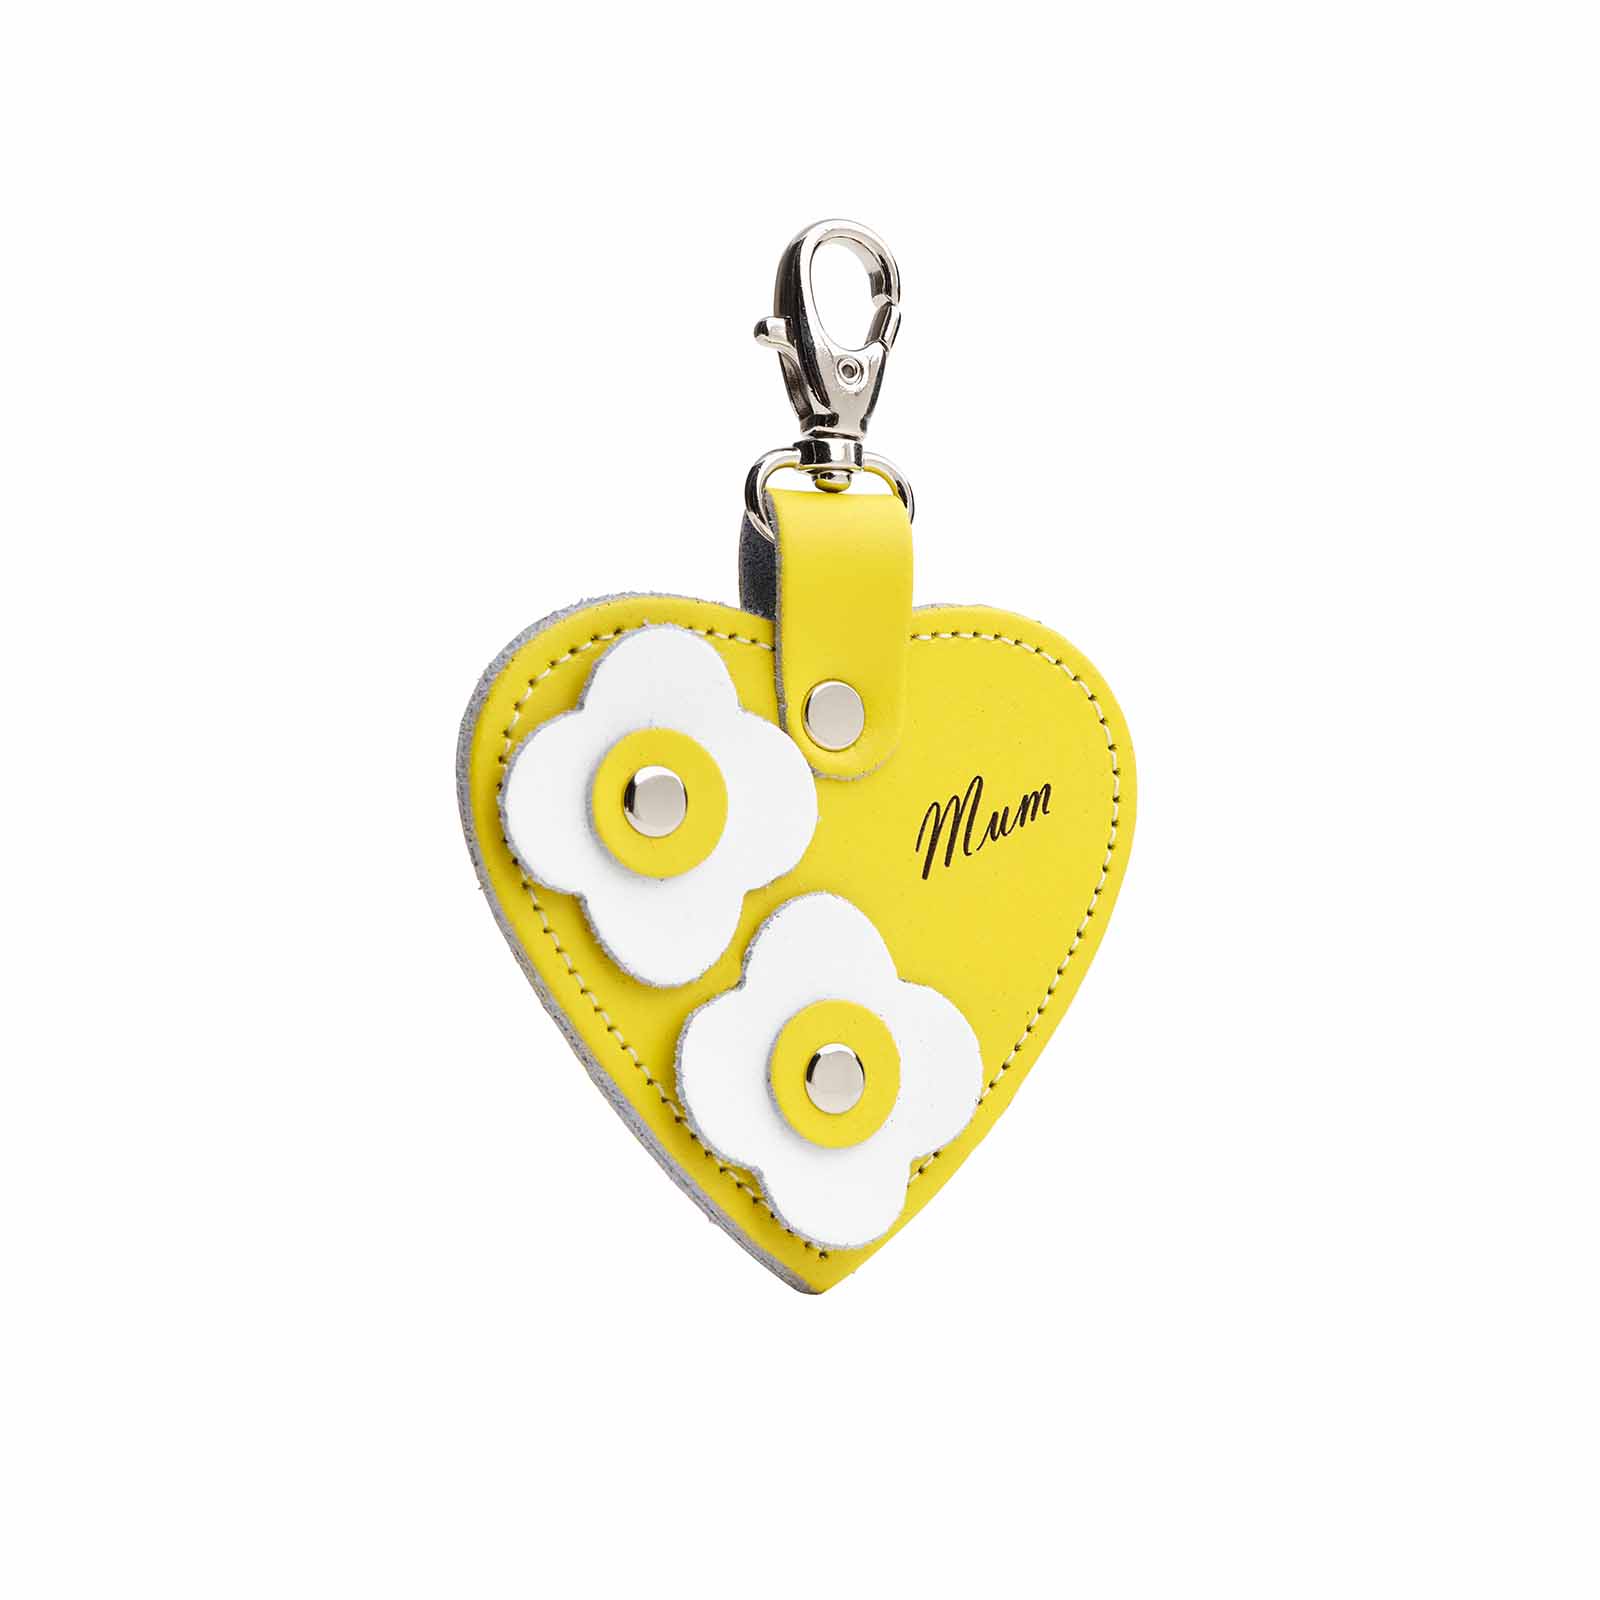 Love heart bag charm - with ’Mum’ engraving and flower appliques - Pastel Yellow